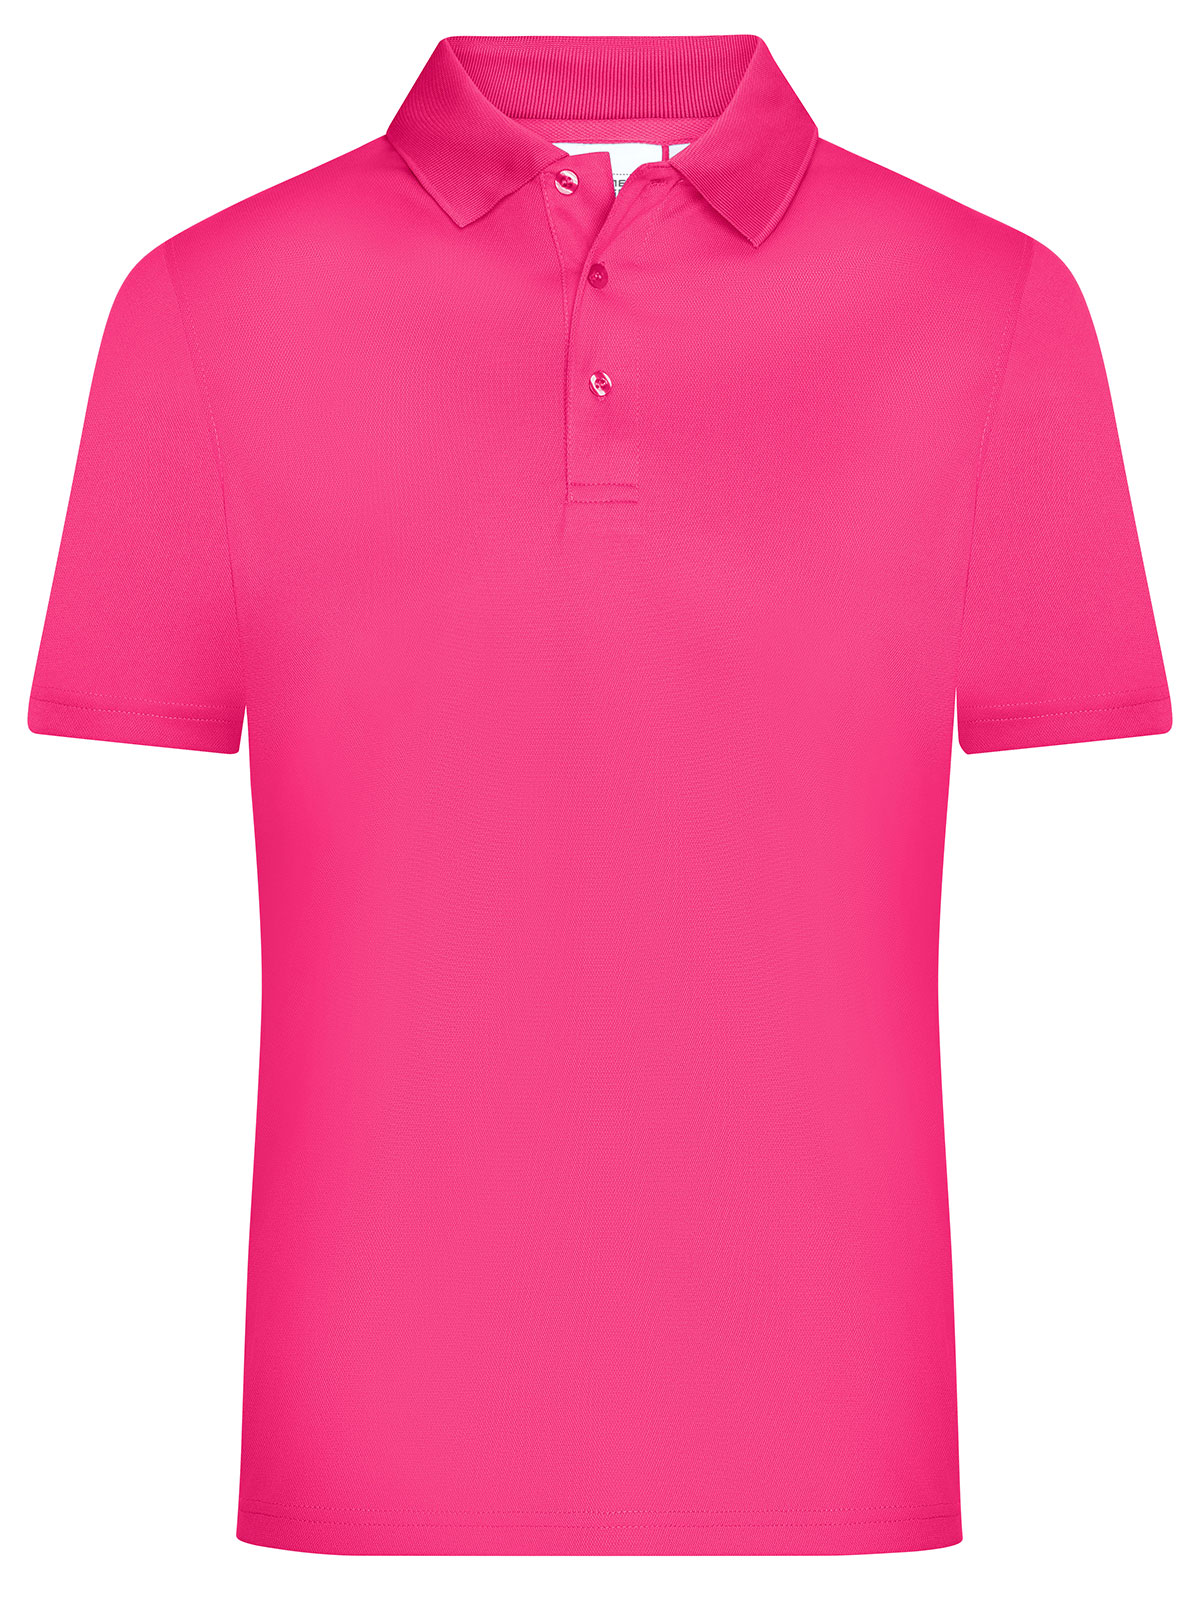 mens-active-polo-pink.webp